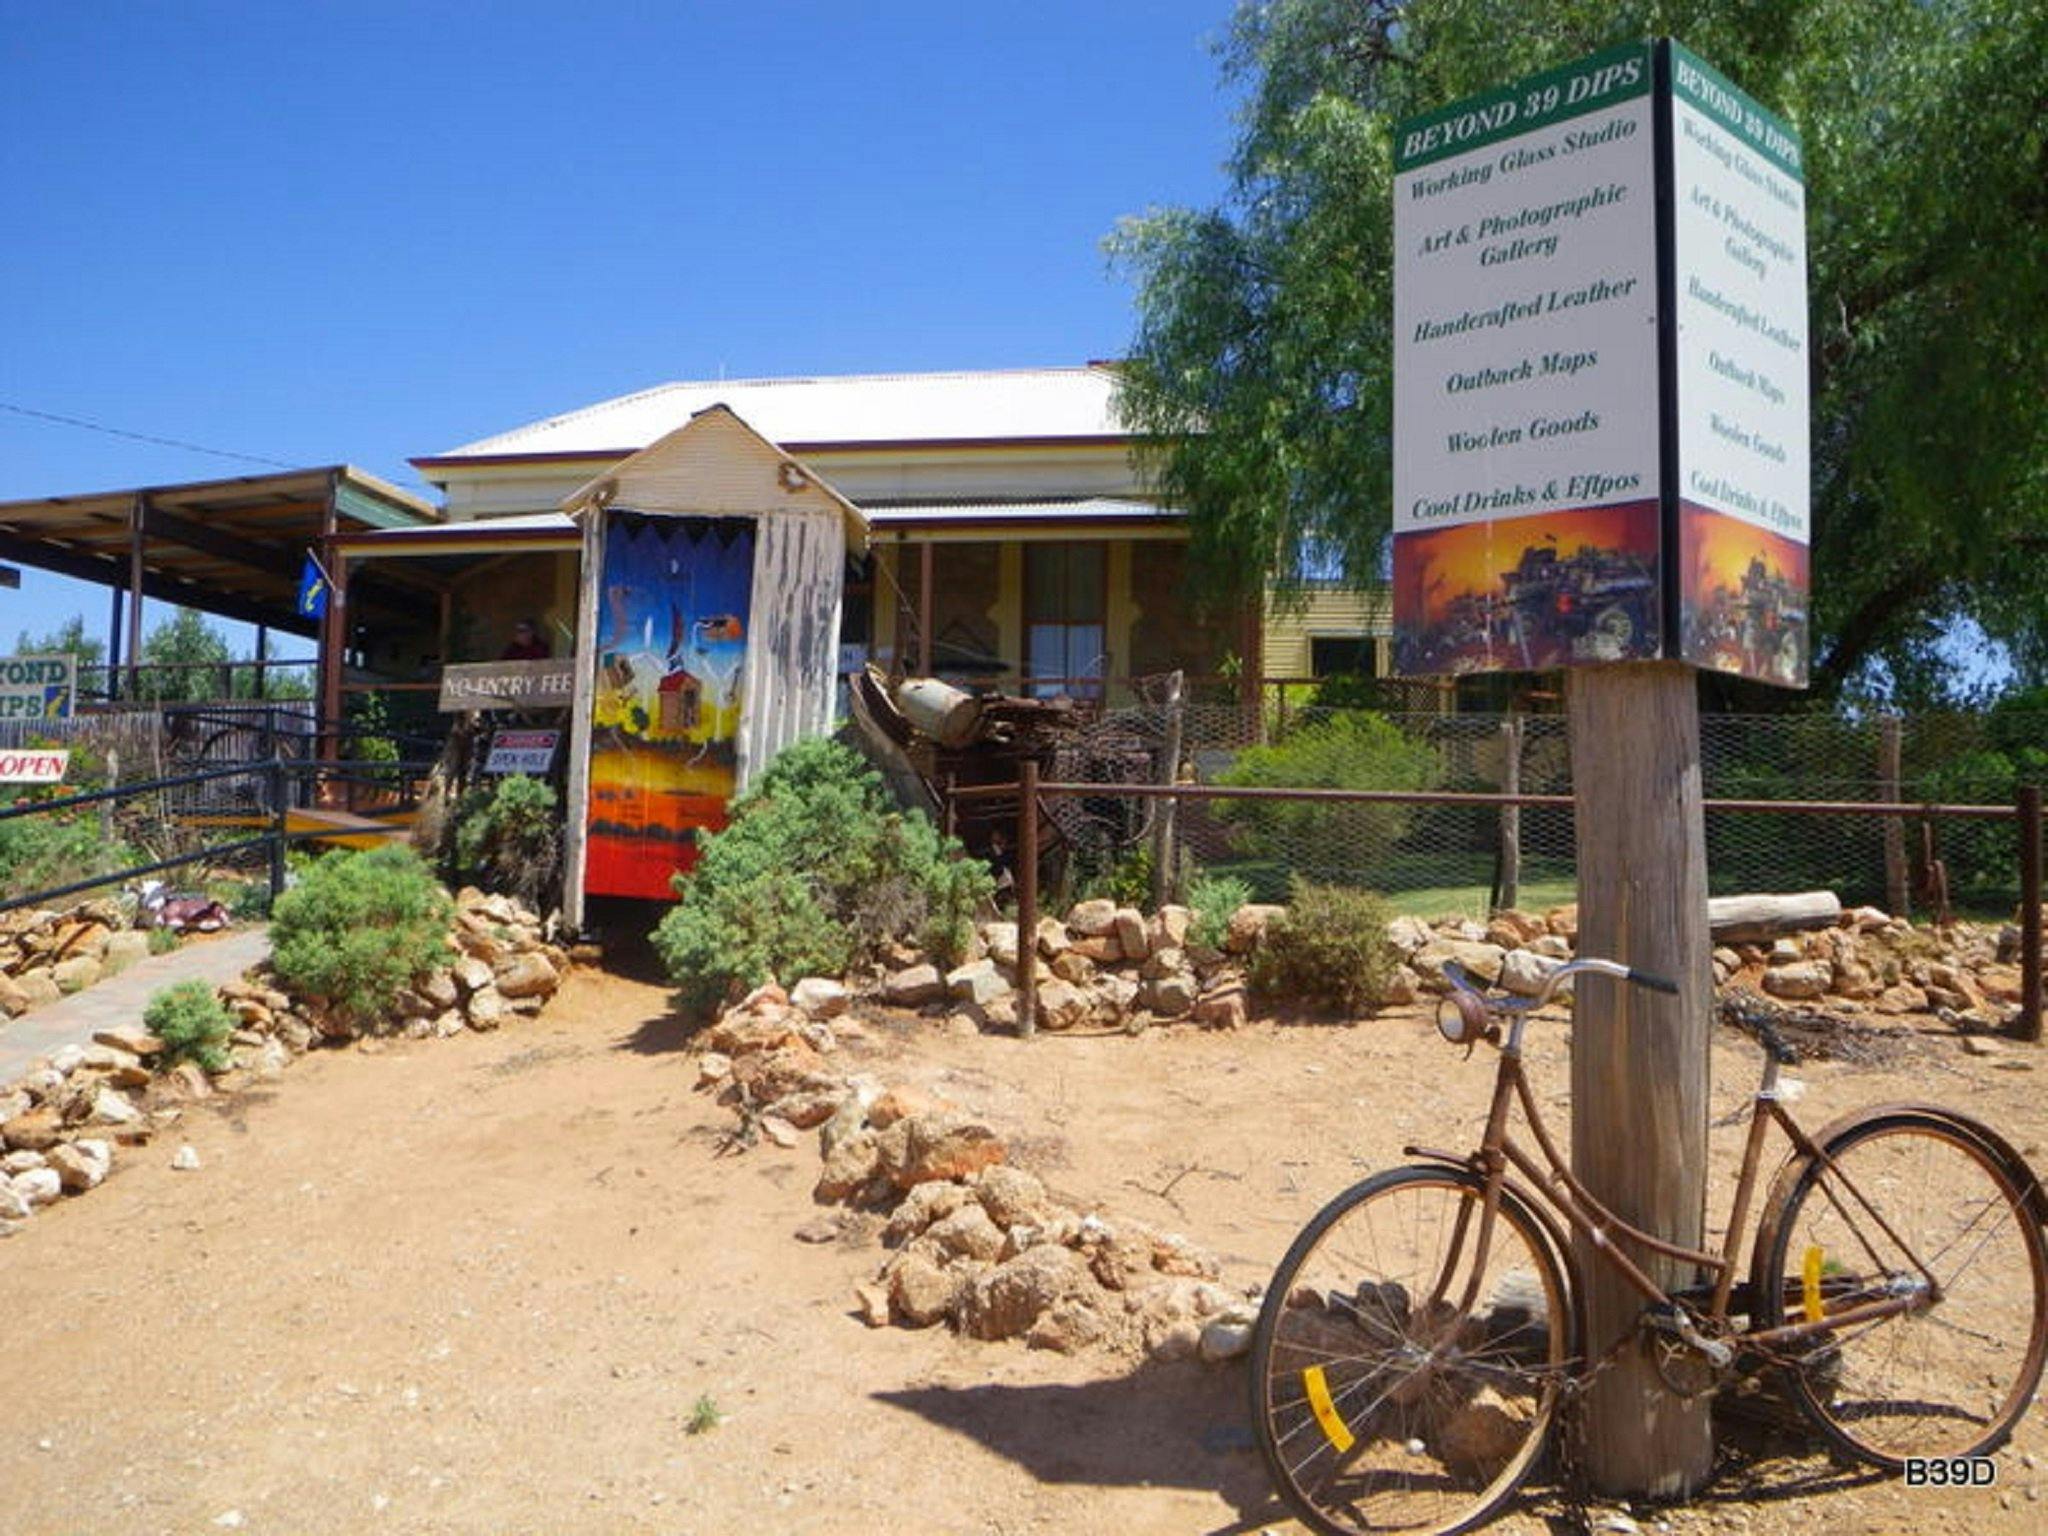 Silverton Visitor Information Centre - Beyond 39 Dips | NSW Holidays